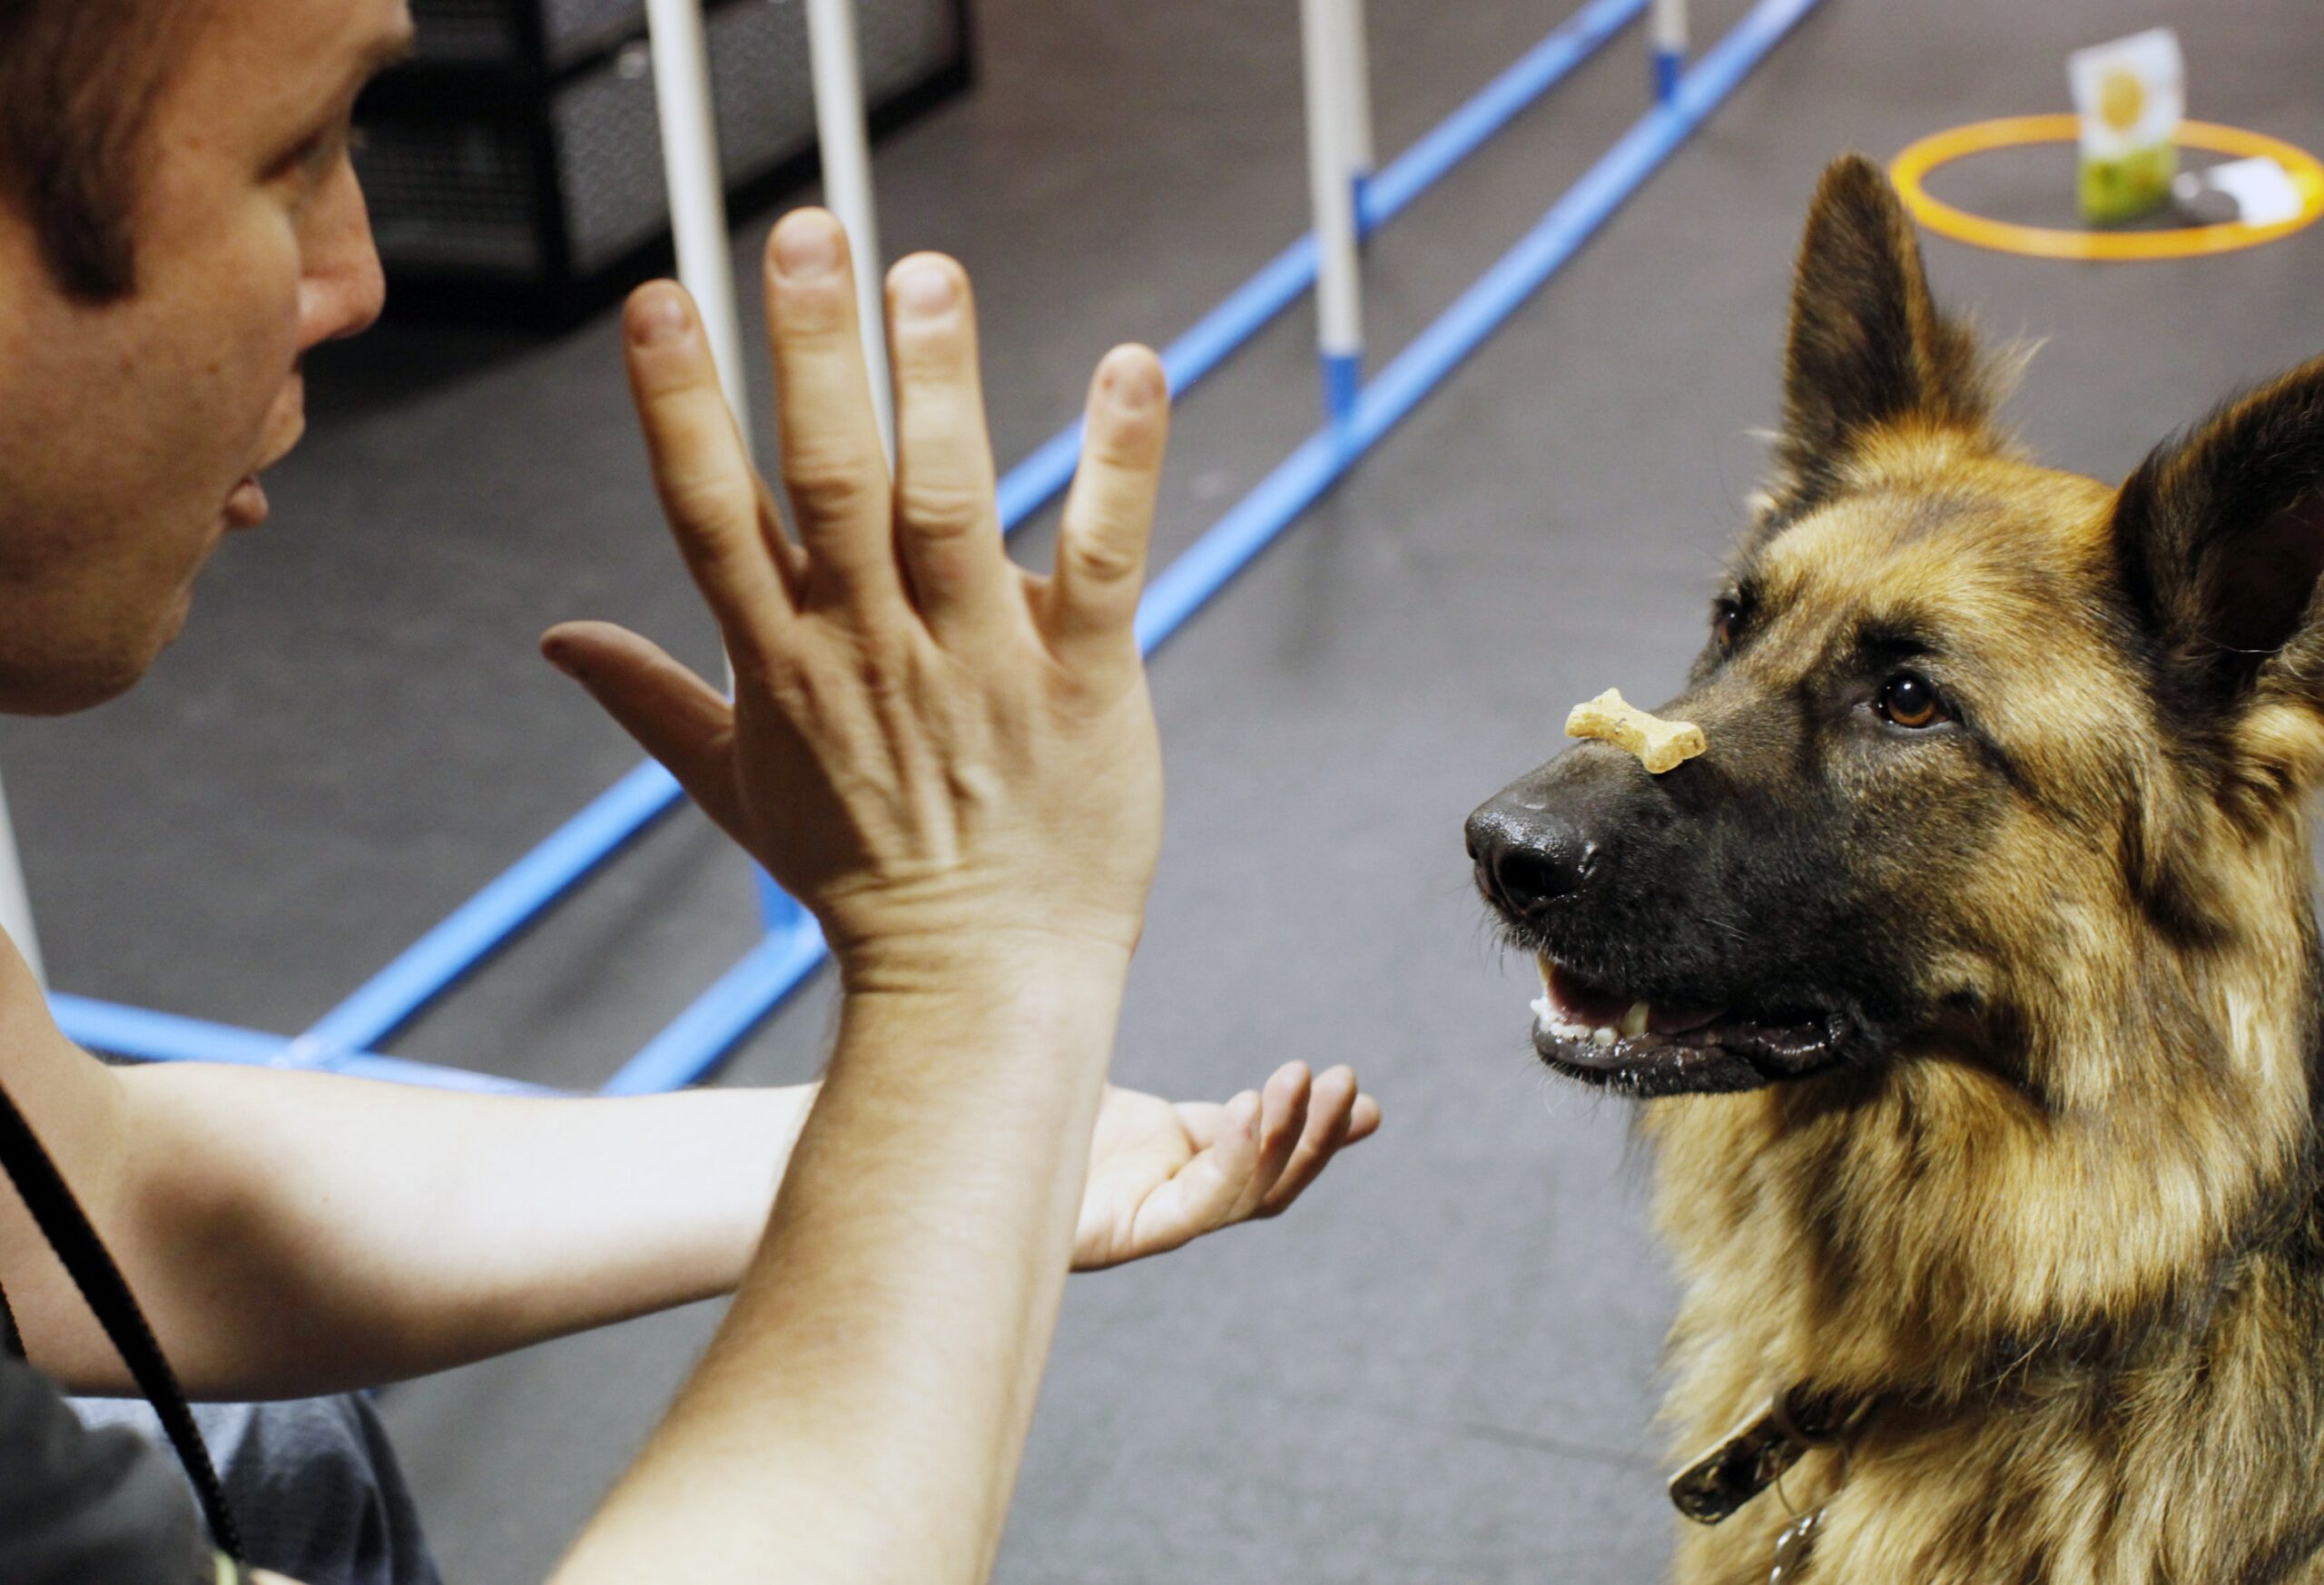 A person kneels in front of a dog, training it to sit with a treat on its nose